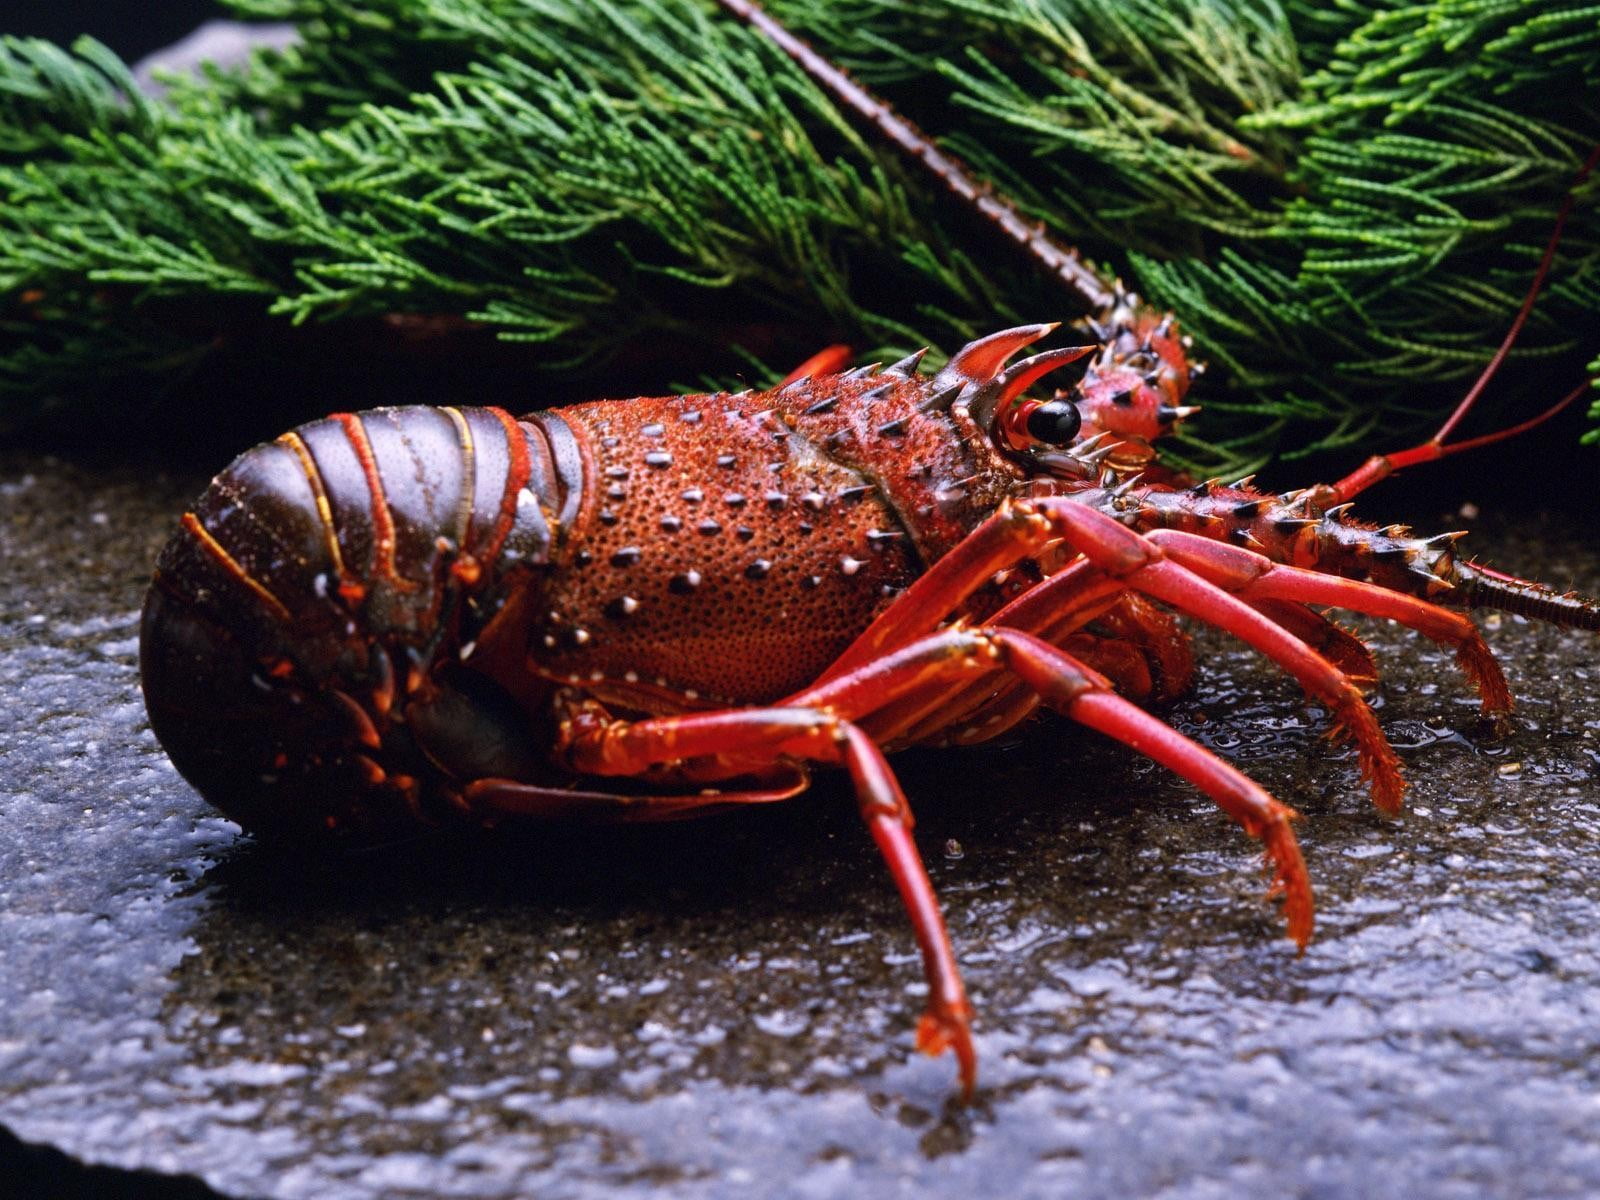 red and black lobster, animals, lobsters, crustaceans